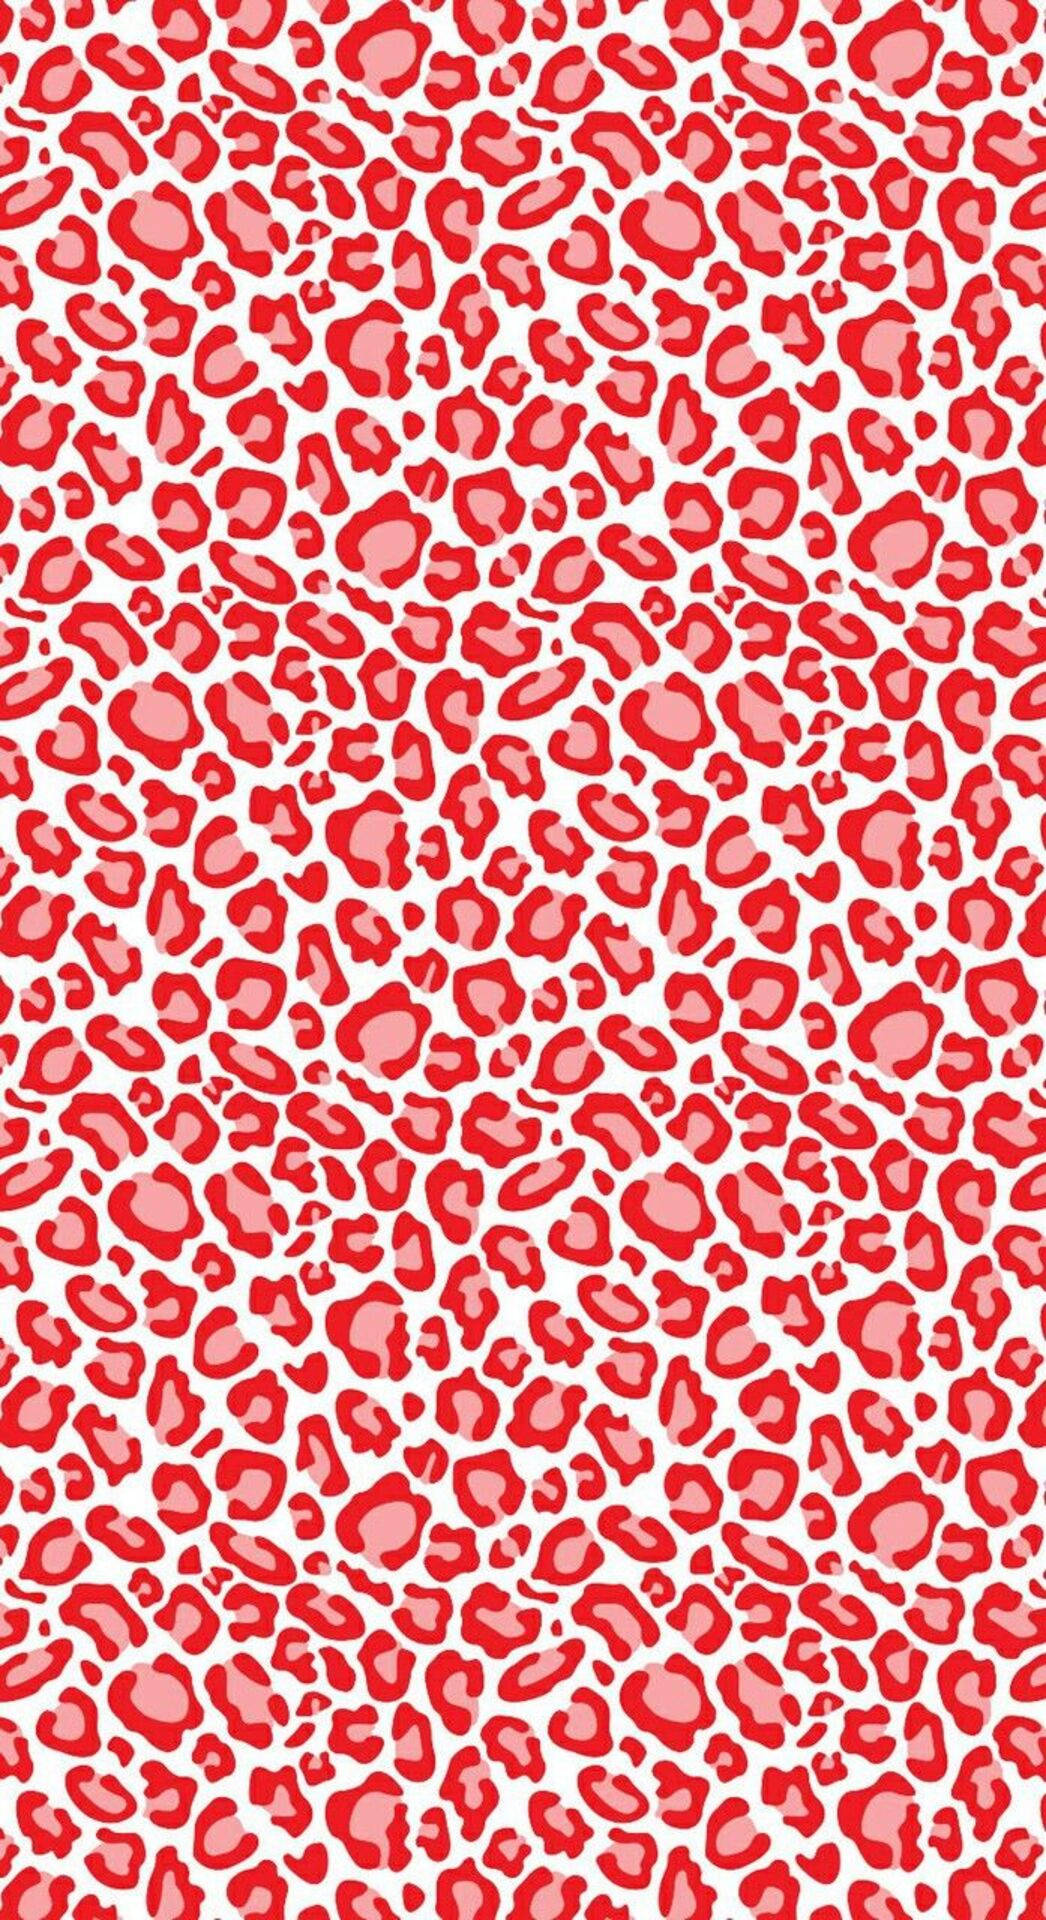 Leopard Print 1046X1920 Wallpaper and Background Image